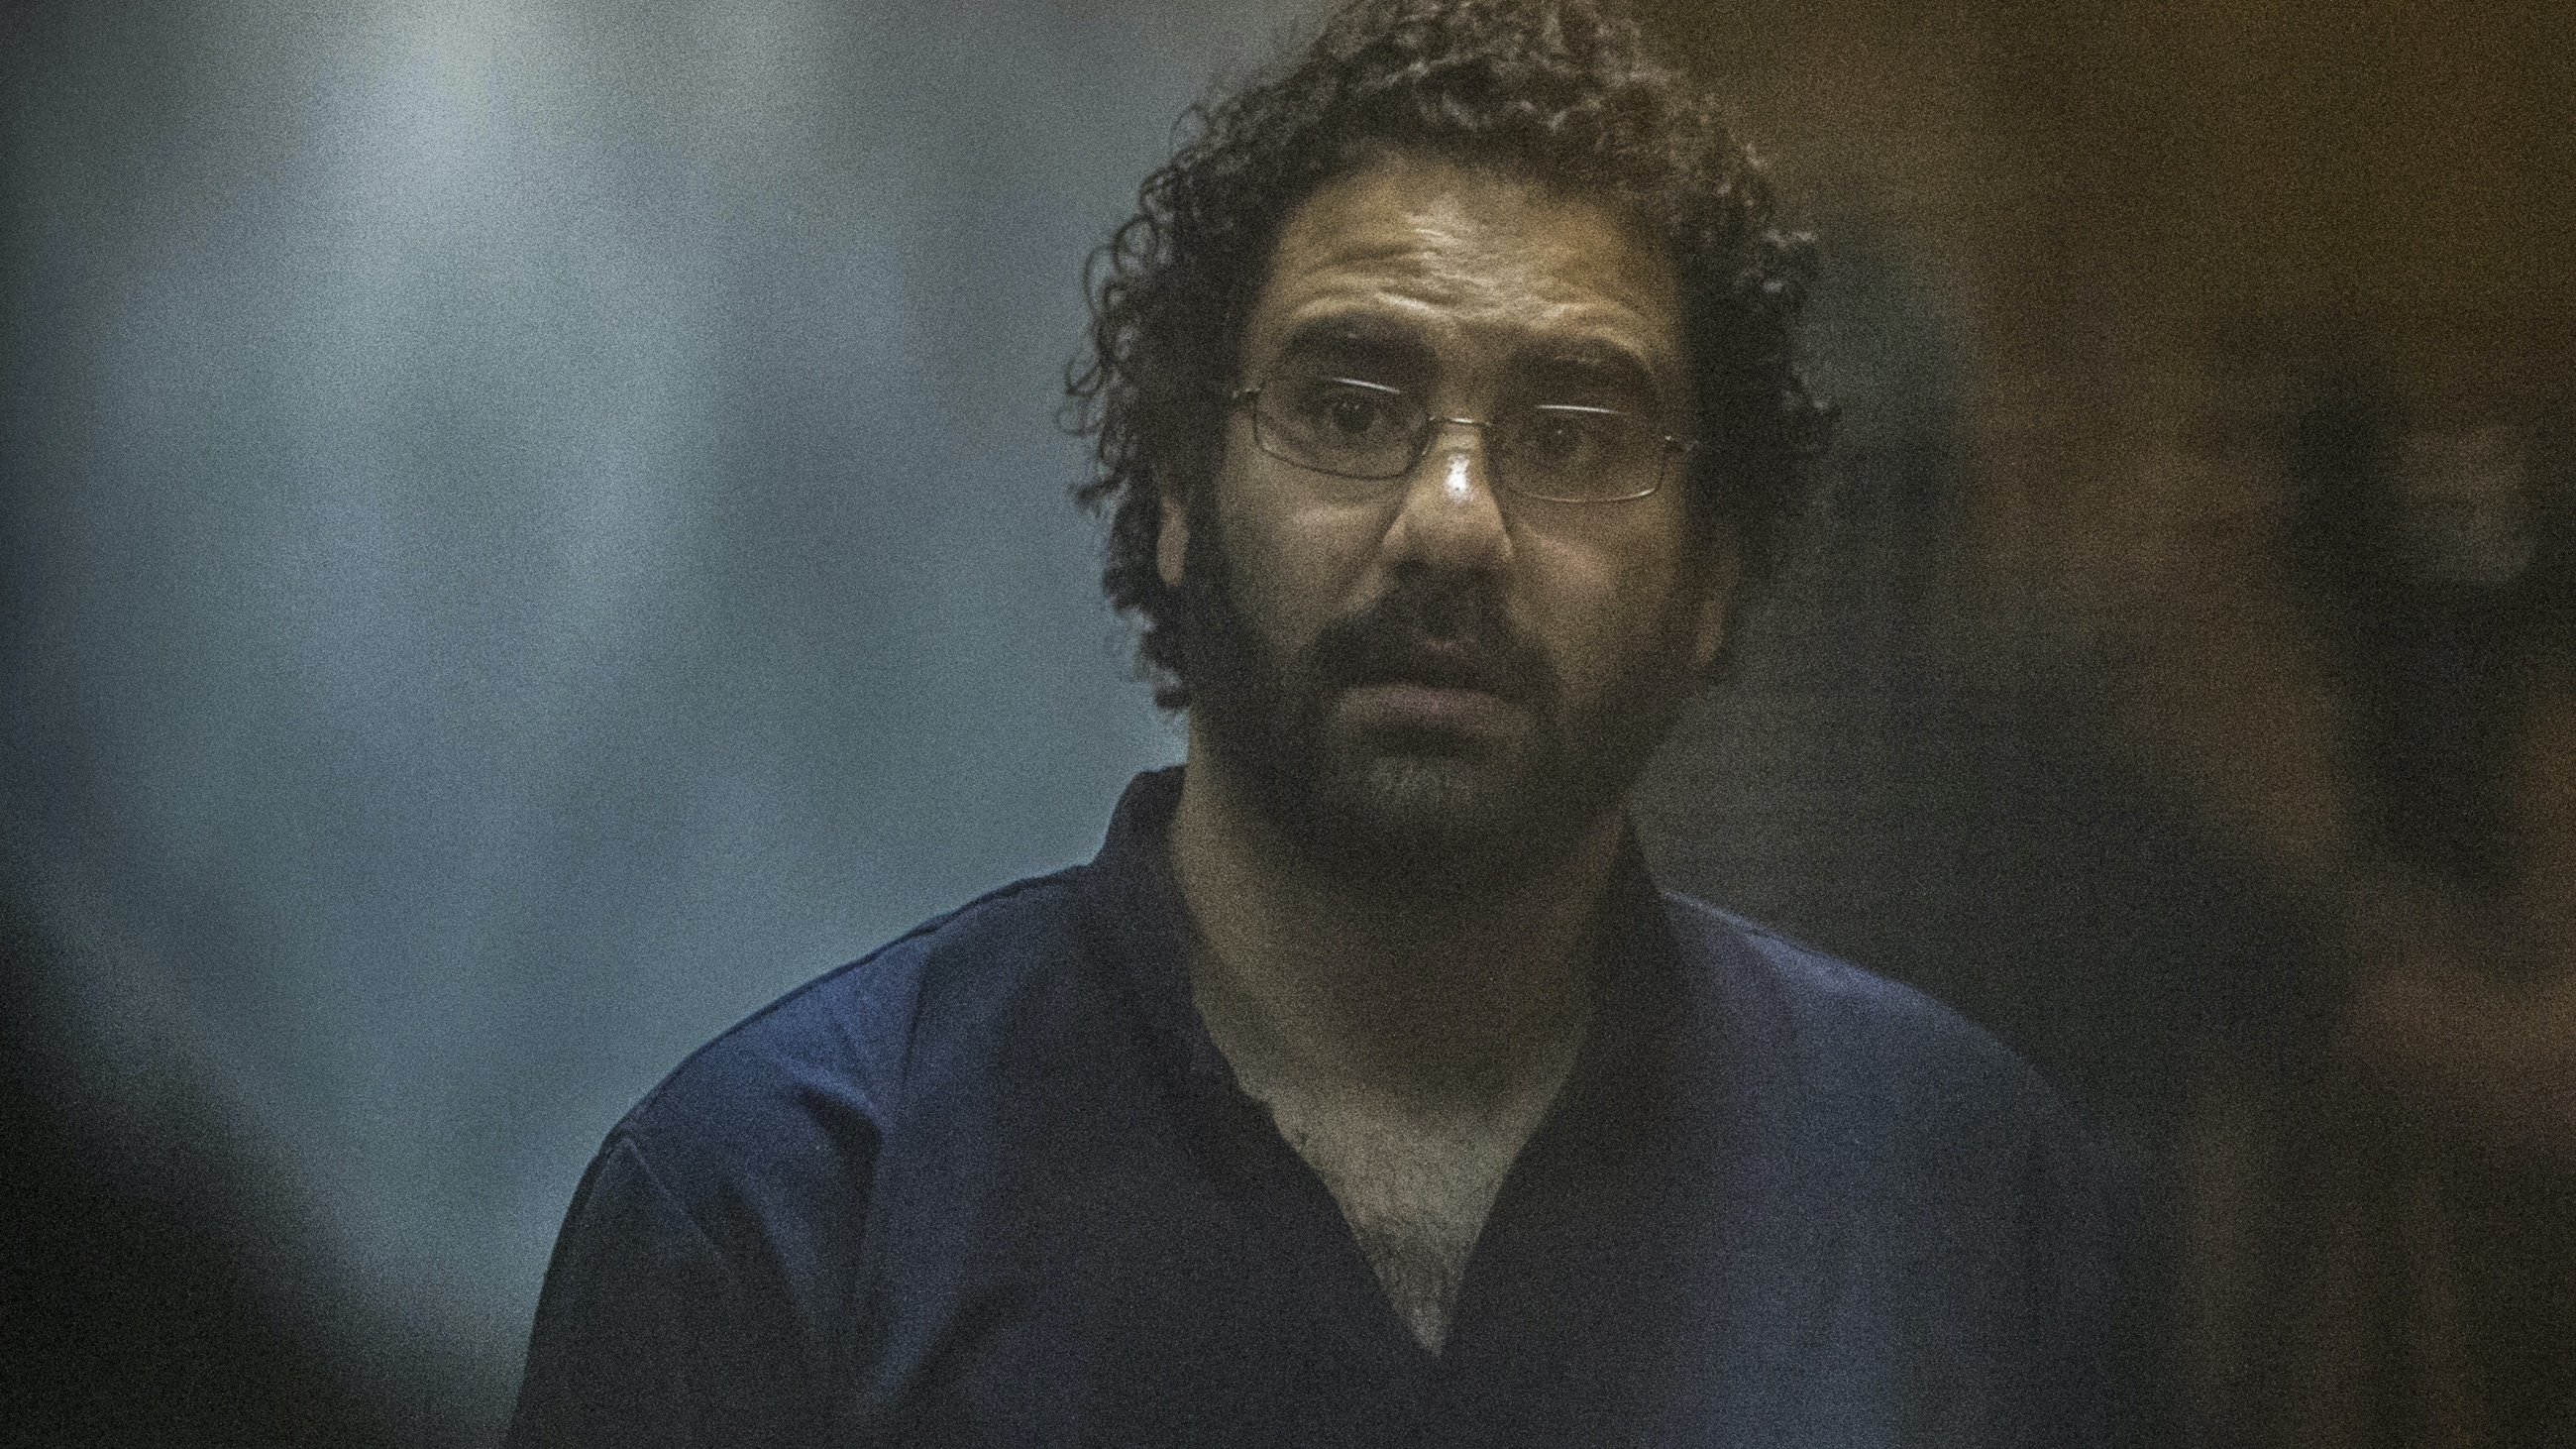 Egyptian activist Alaa Abd el-Fattah looks on from behind the defendant's cage during his trial in Cairo on 23 May 2015 (AFP)